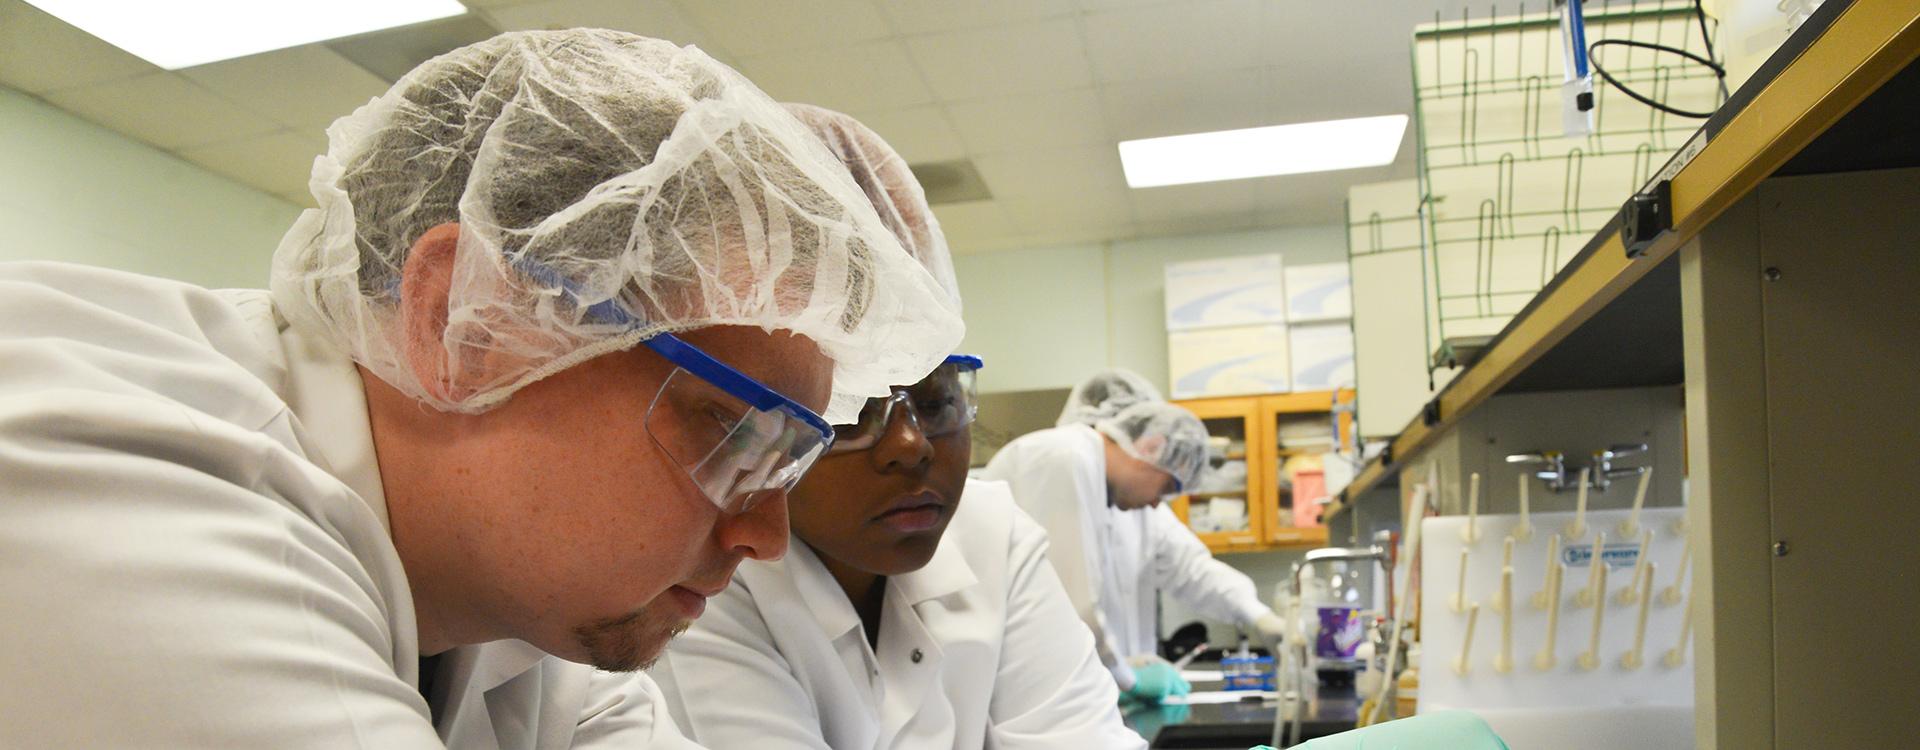 biotechnology students wearing lab coats and paper caps work in a chemistry lab